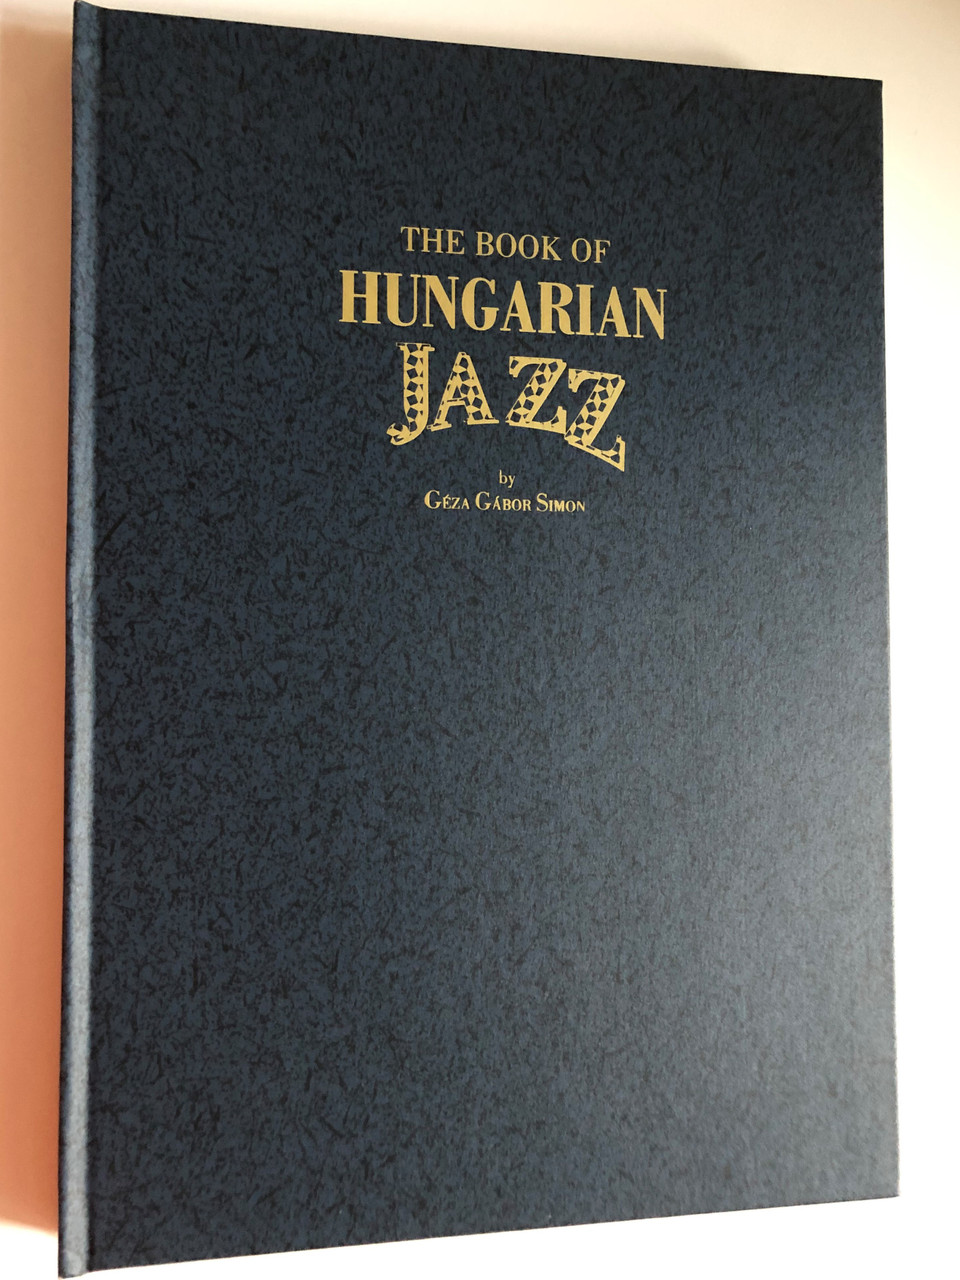 https://cdn10.bigcommerce.com/s-62bdpkt7pb/products/51337/images/261429/The_Book_of_Hungarian_Jazz_1__84430.1671473676.1280.1280.JPG?c=2